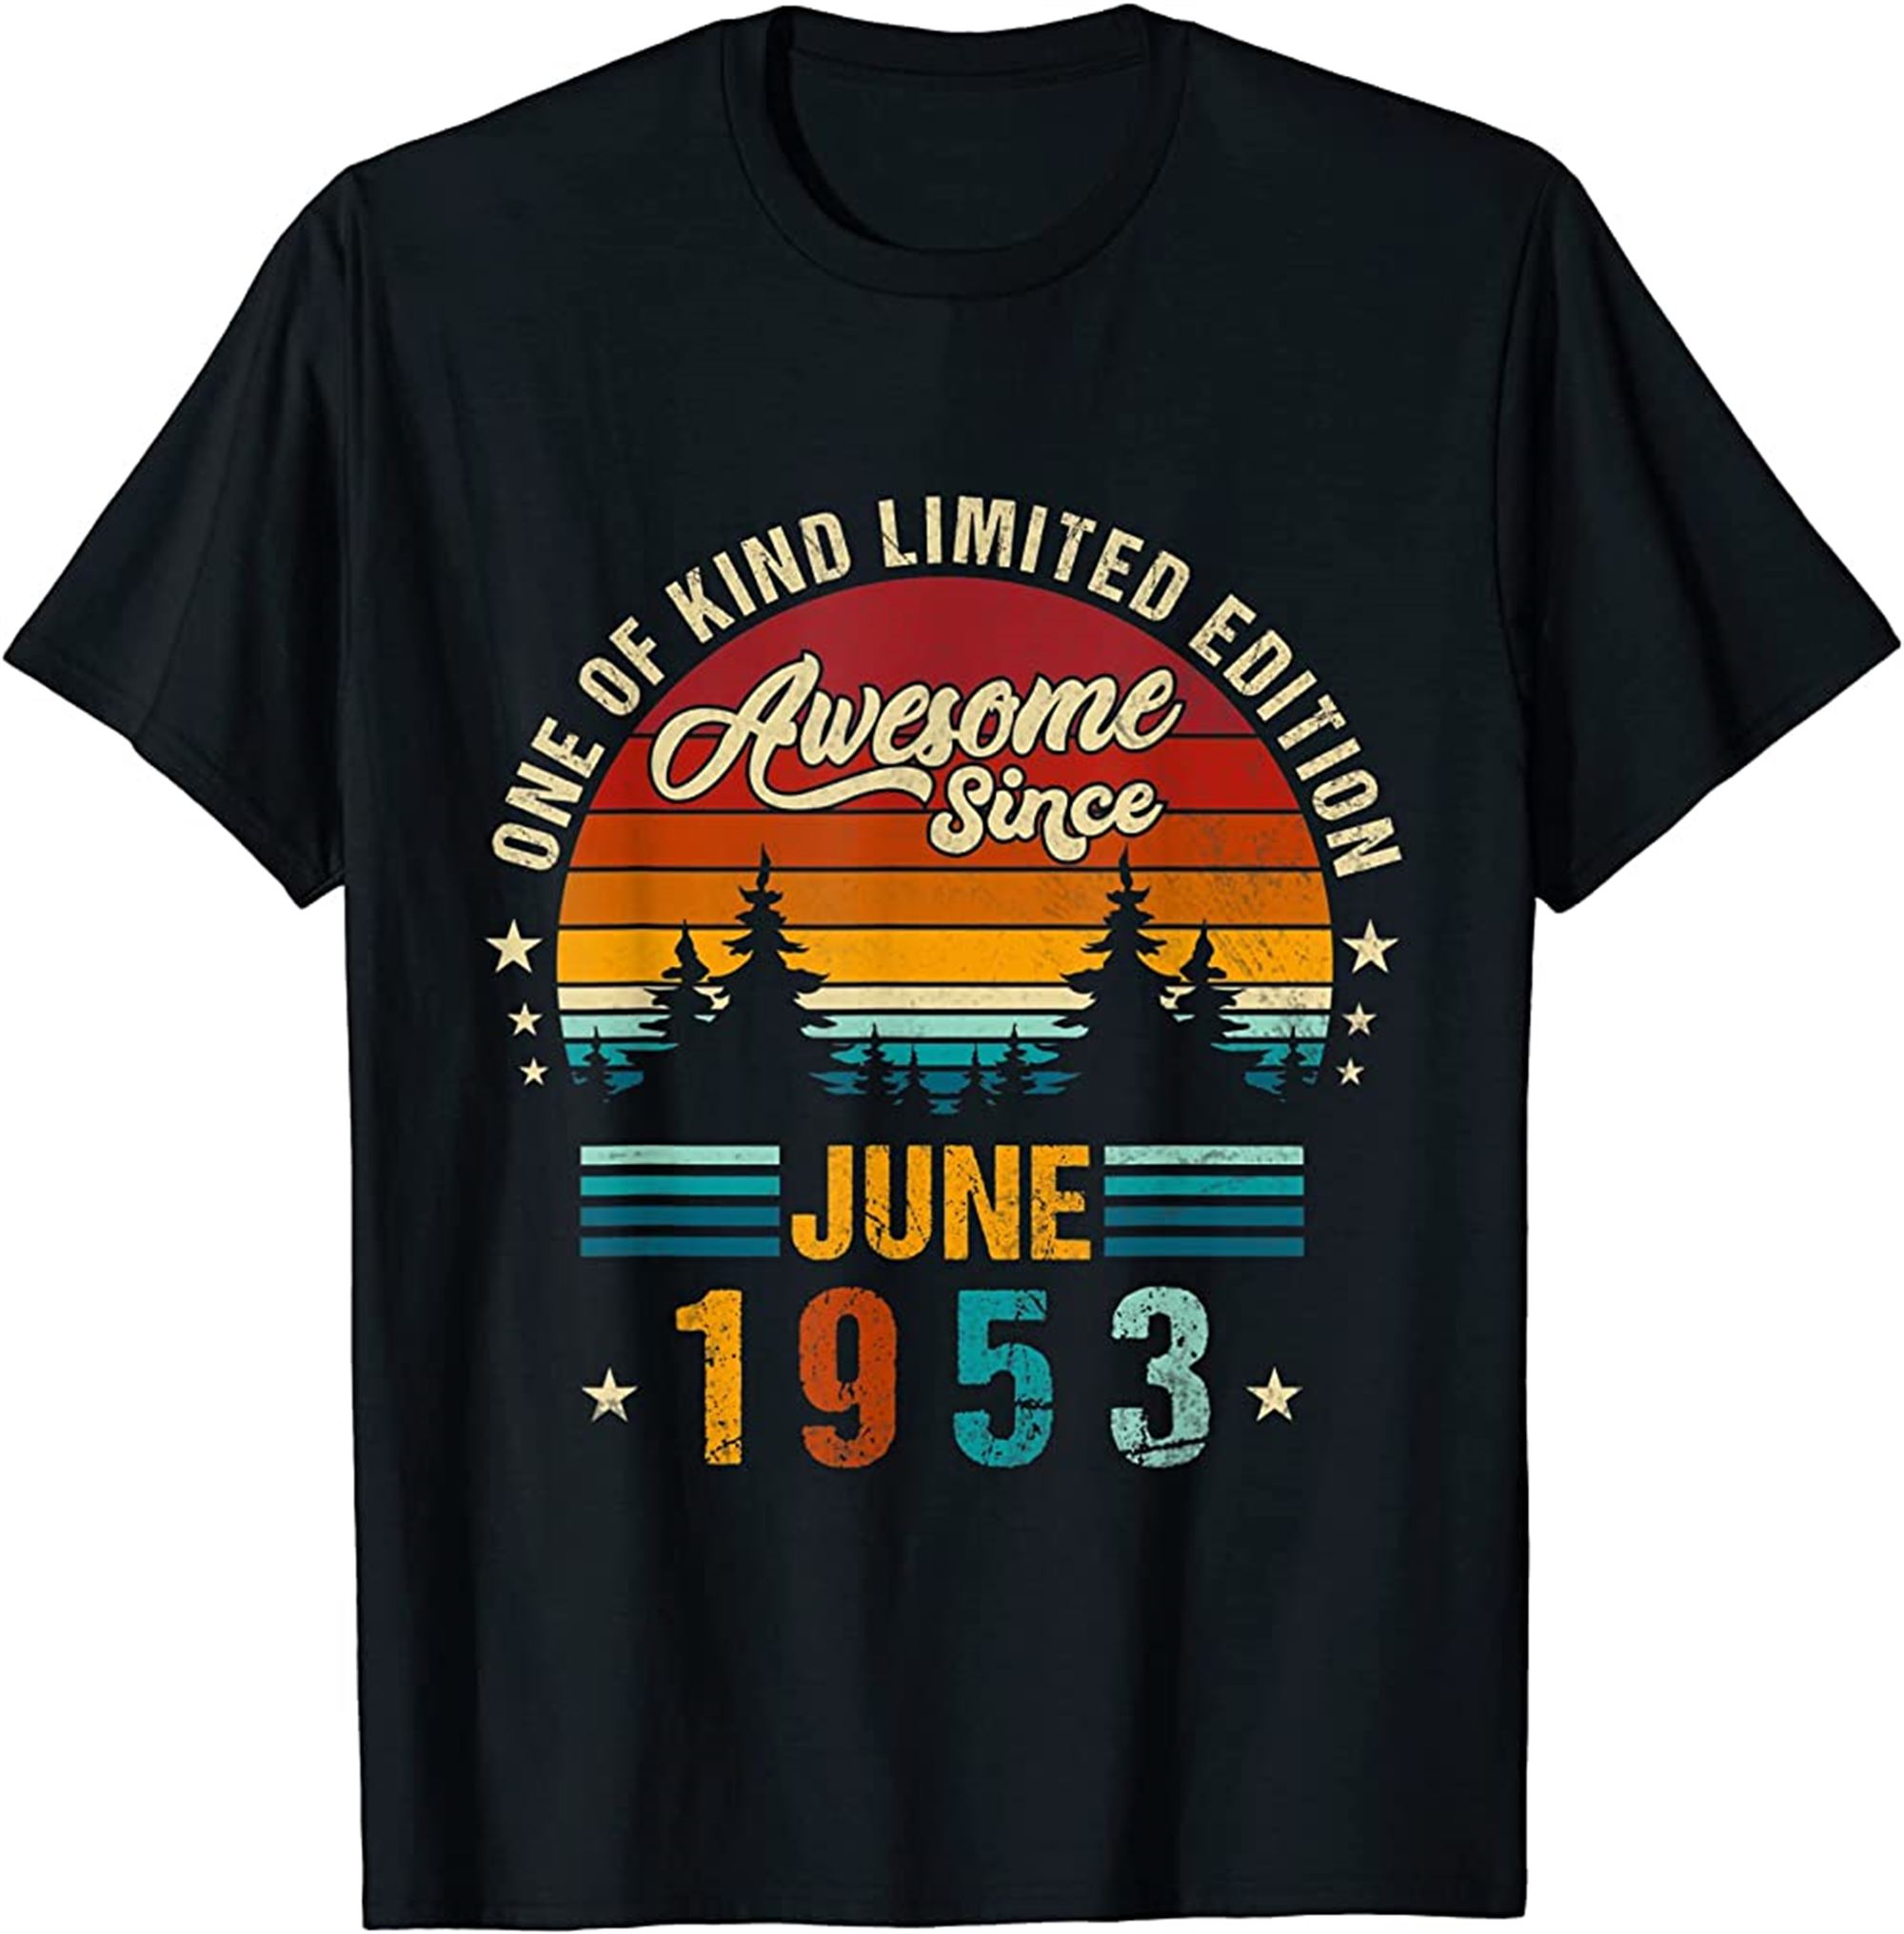 Vintage 69th Birthday Awesome Since June 1953 Epic Legend T-shirt Full Size Up To 5xl